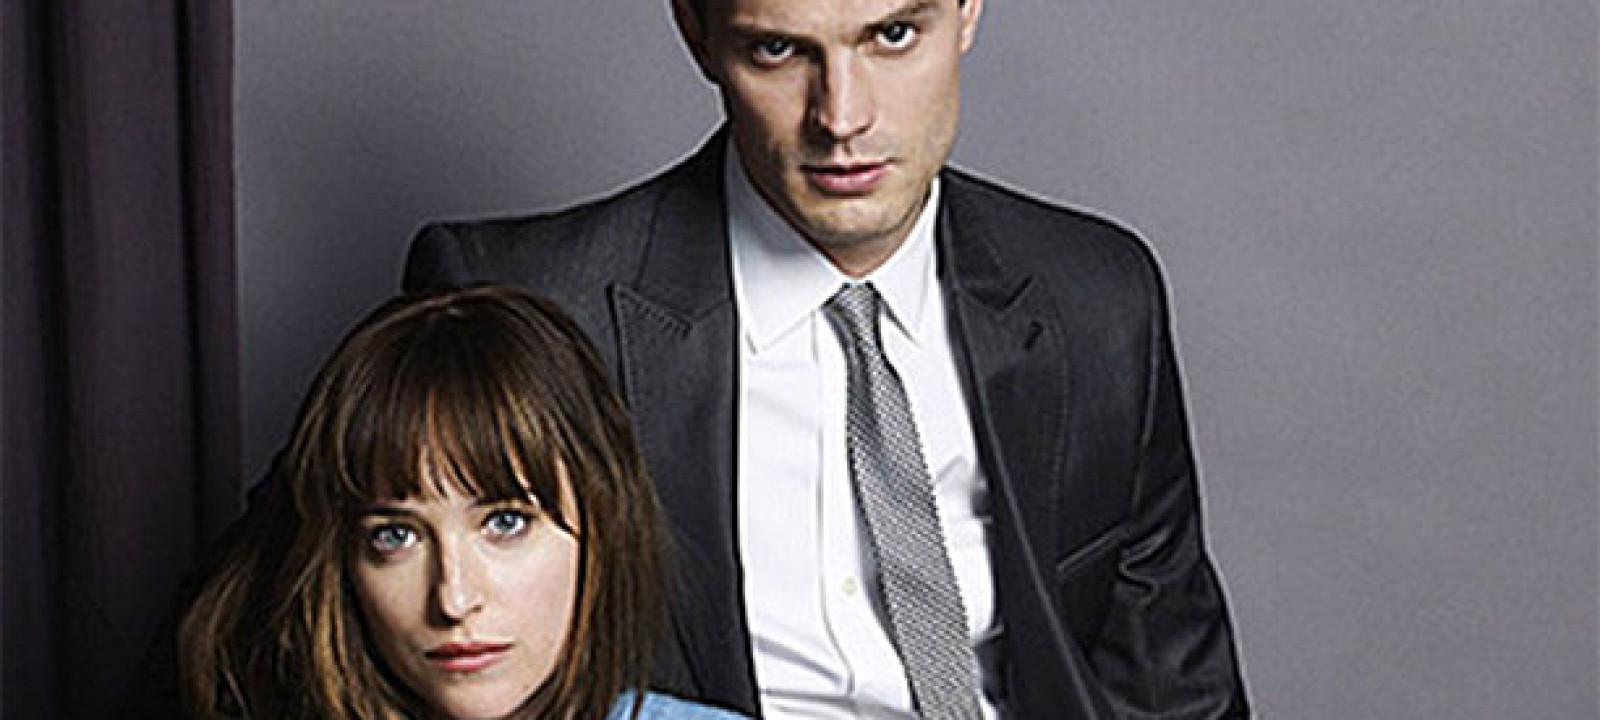 where to watch 50 shades of grey